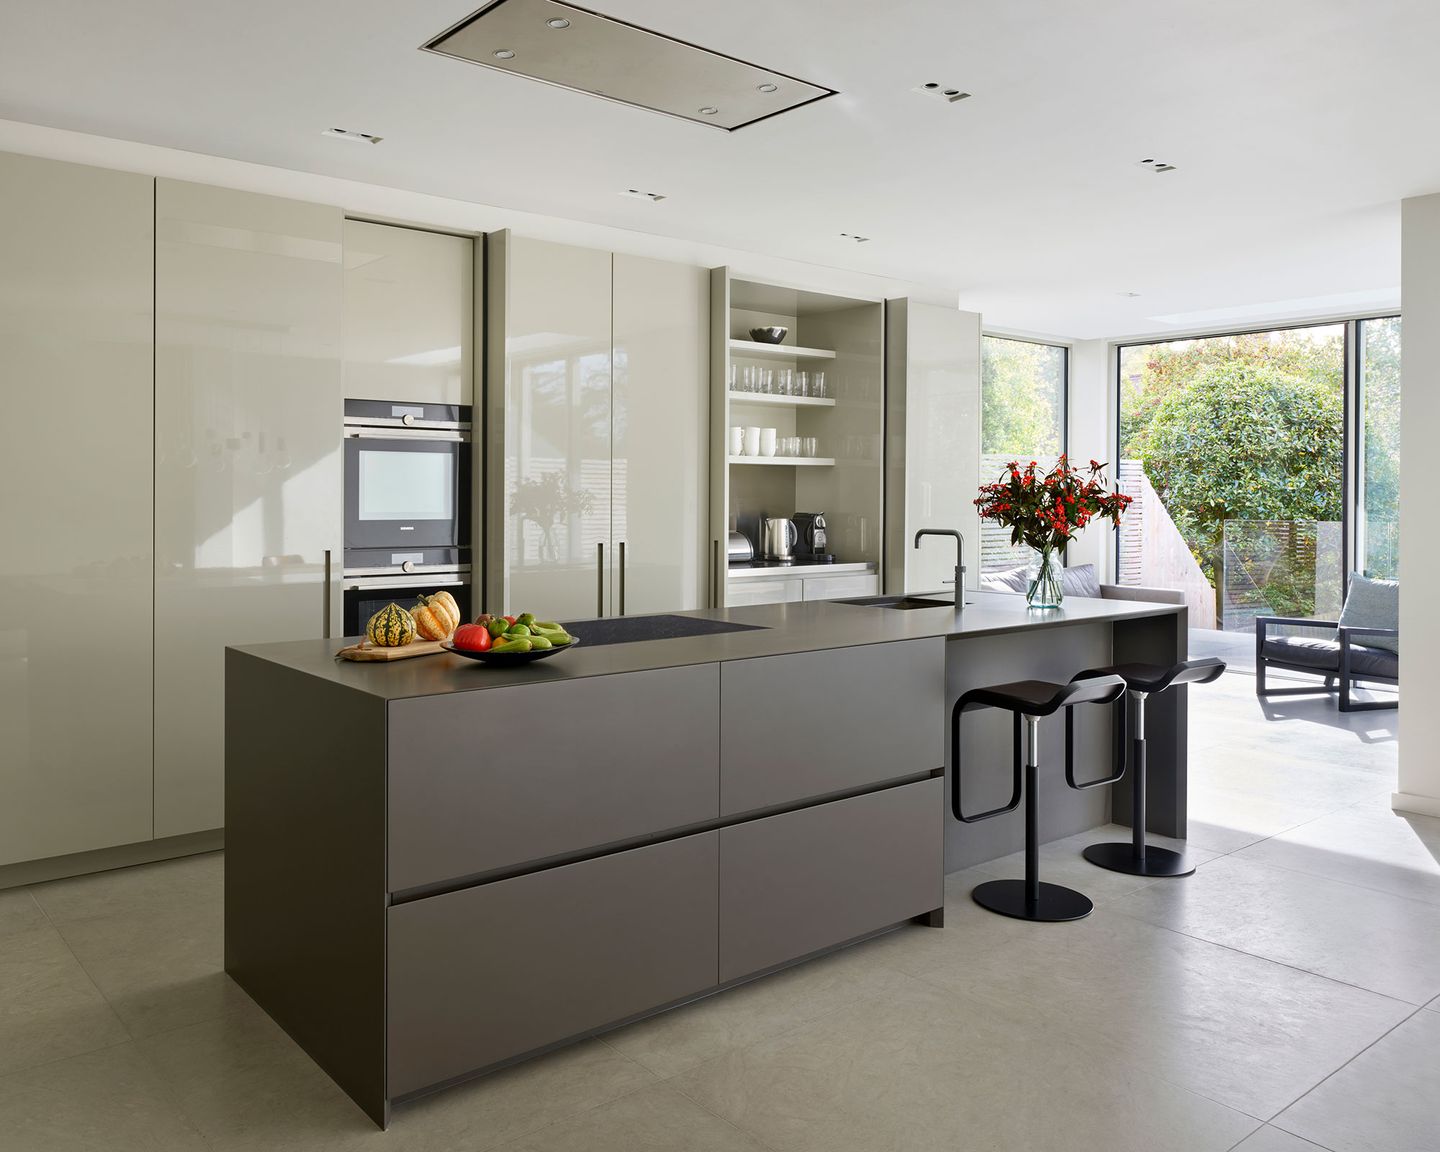 How to design a modern kitchen – tips and tricks from the experts